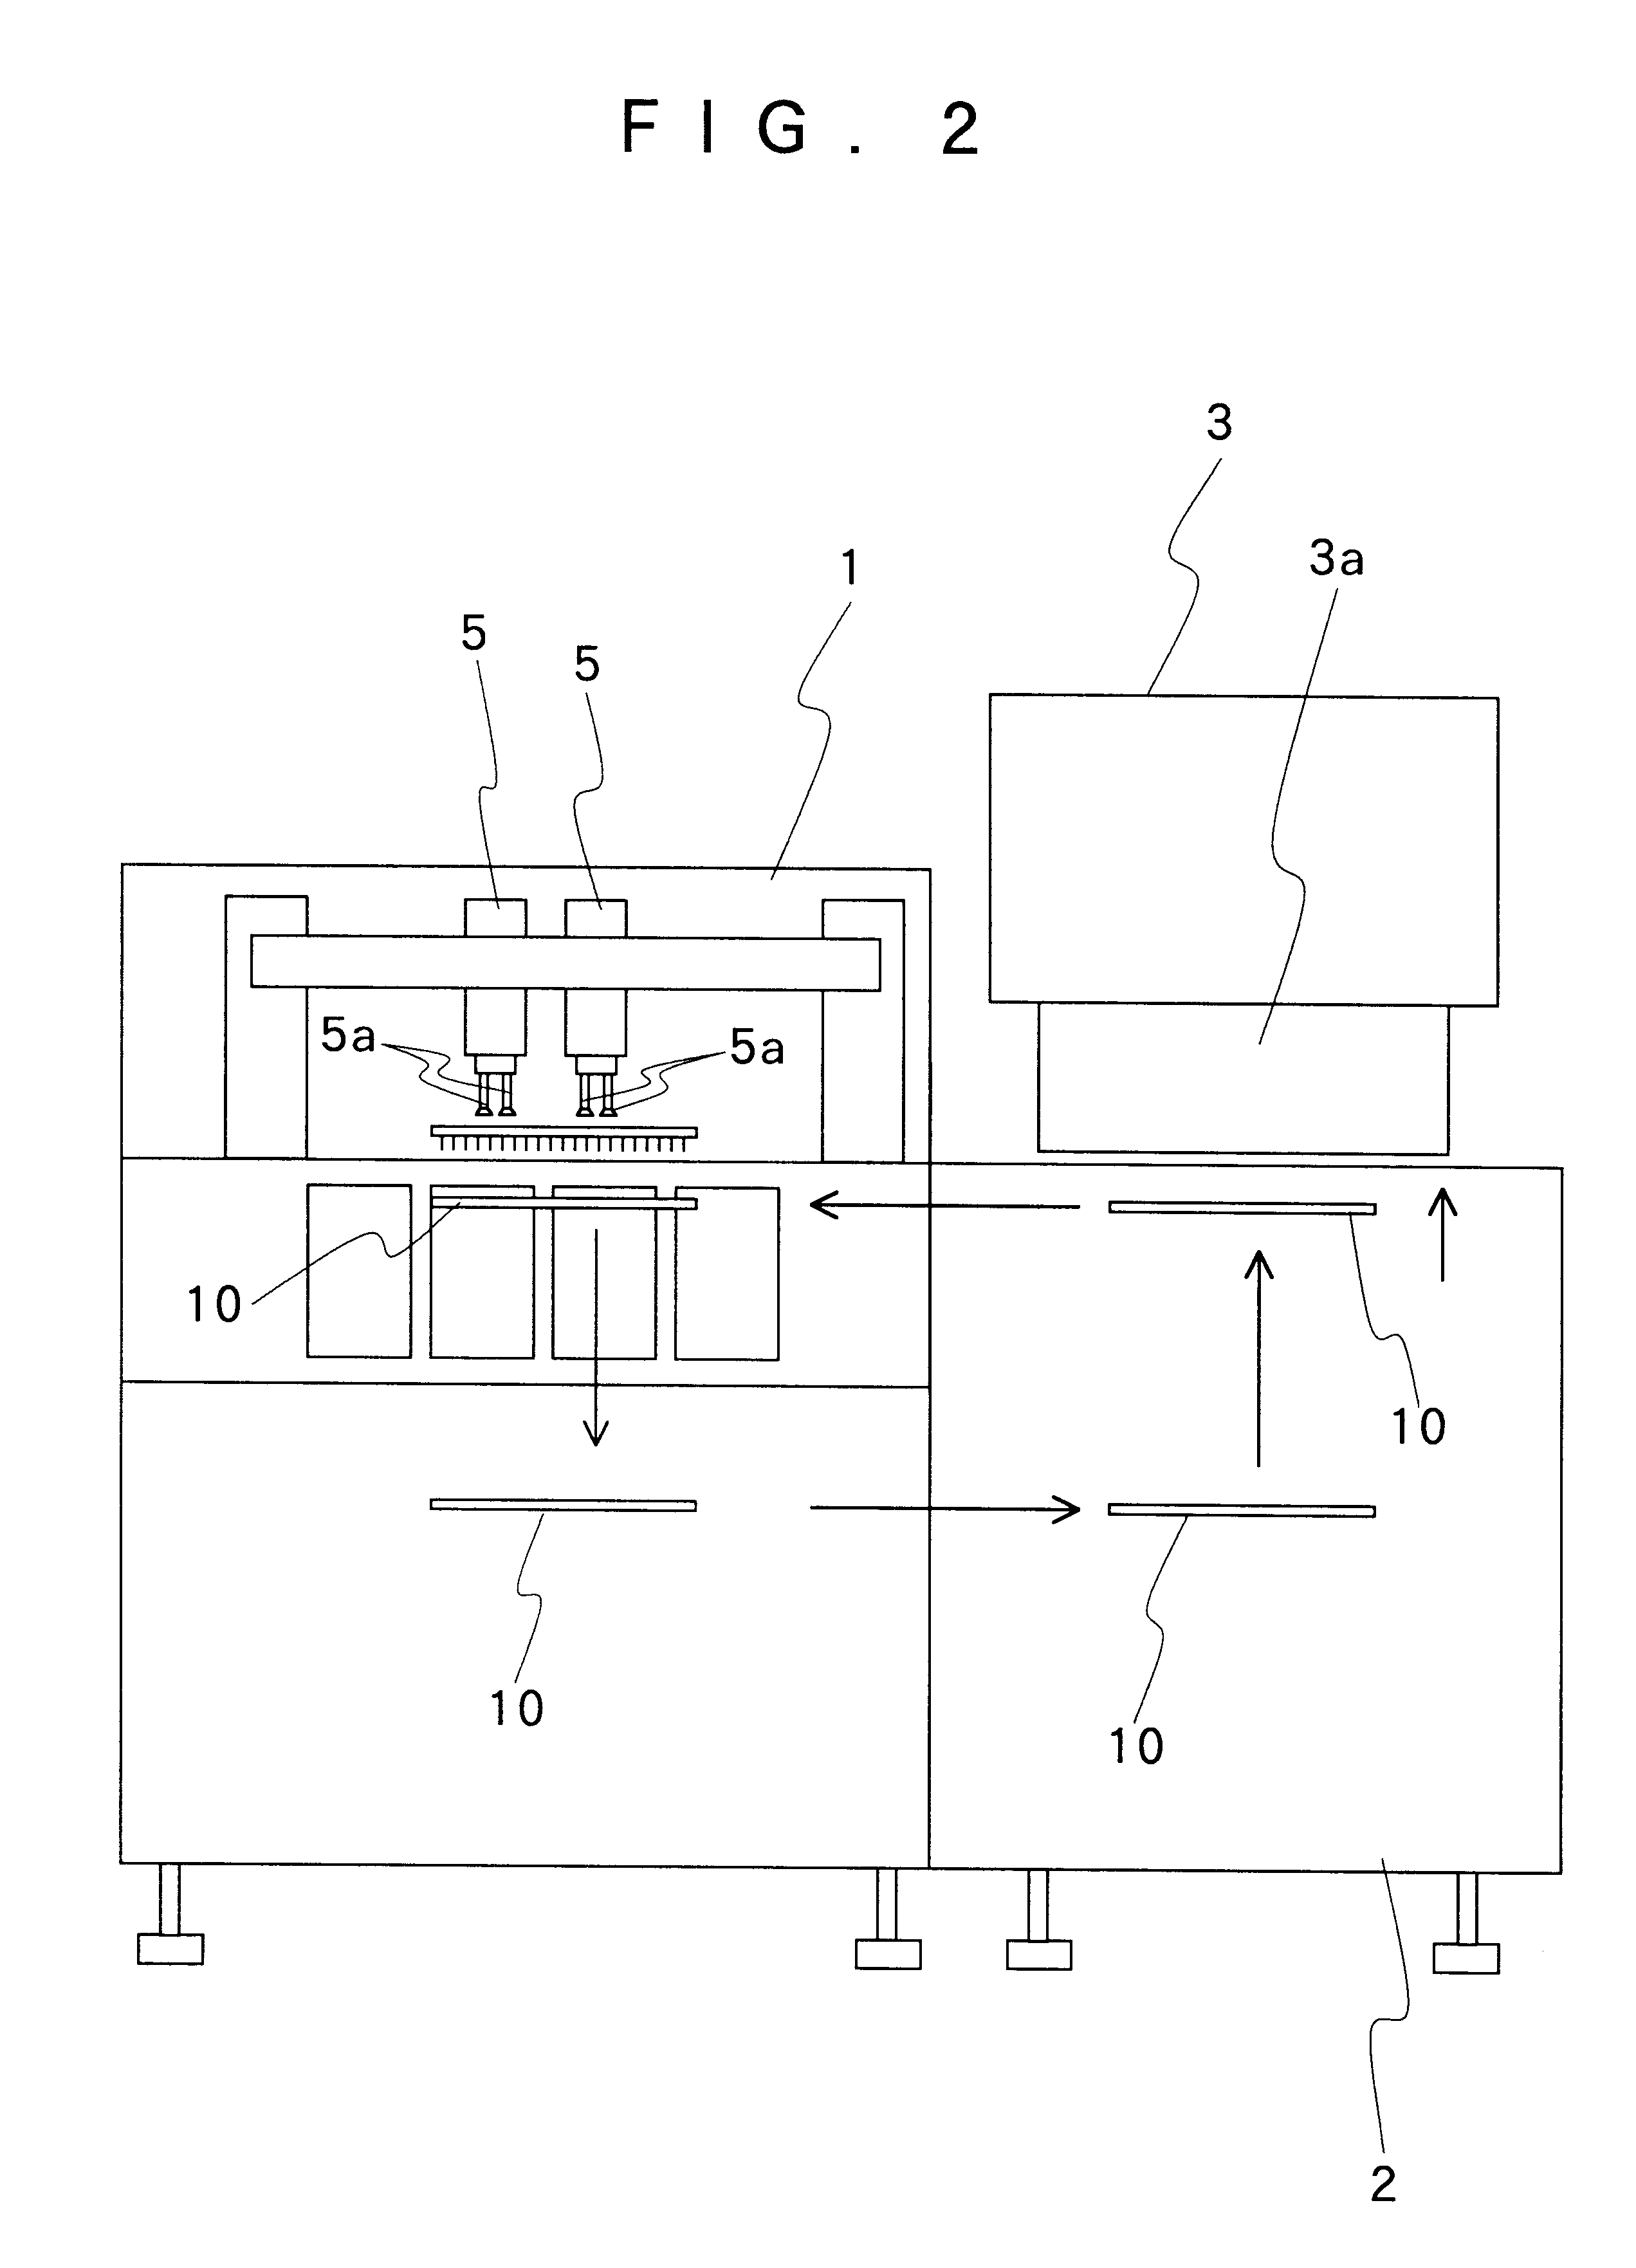 IC device contactor